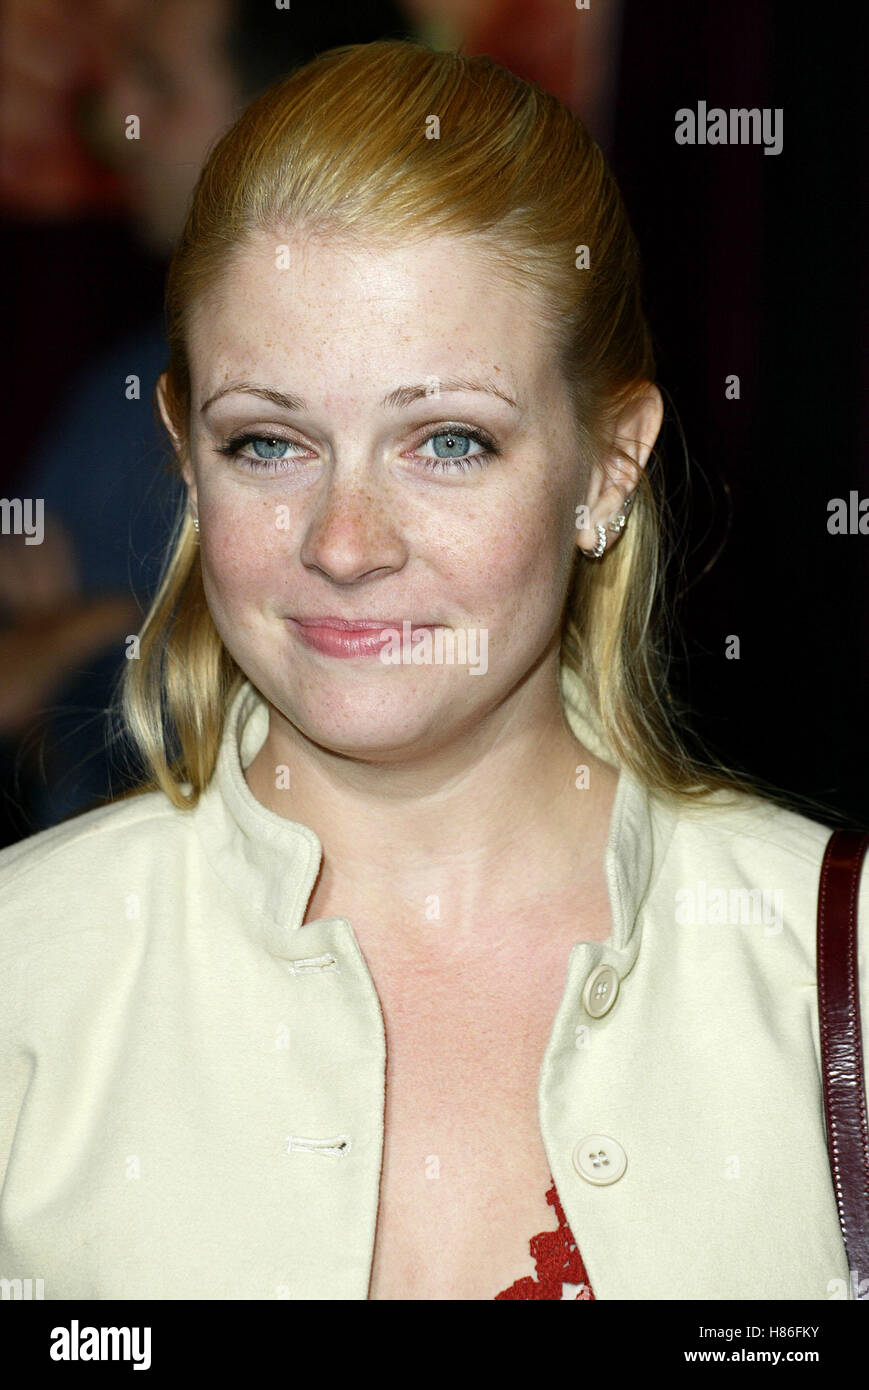 Melissa joan hart hot chick hi-res stock photography and images - Alamy